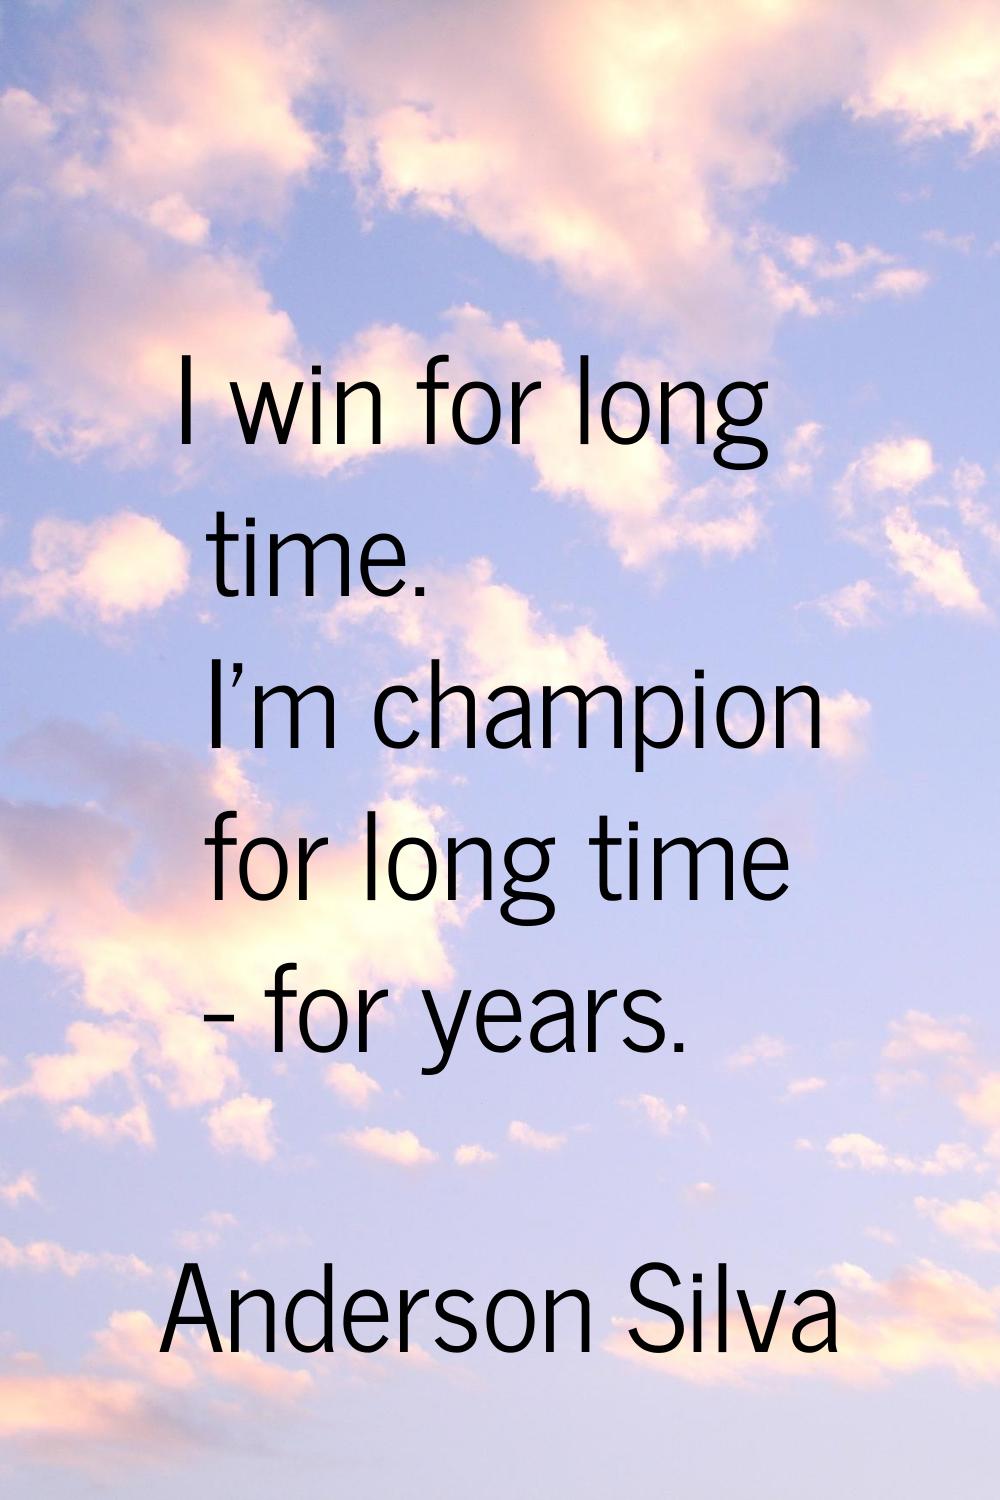 I win for long time. I'm champion for long time - for years.